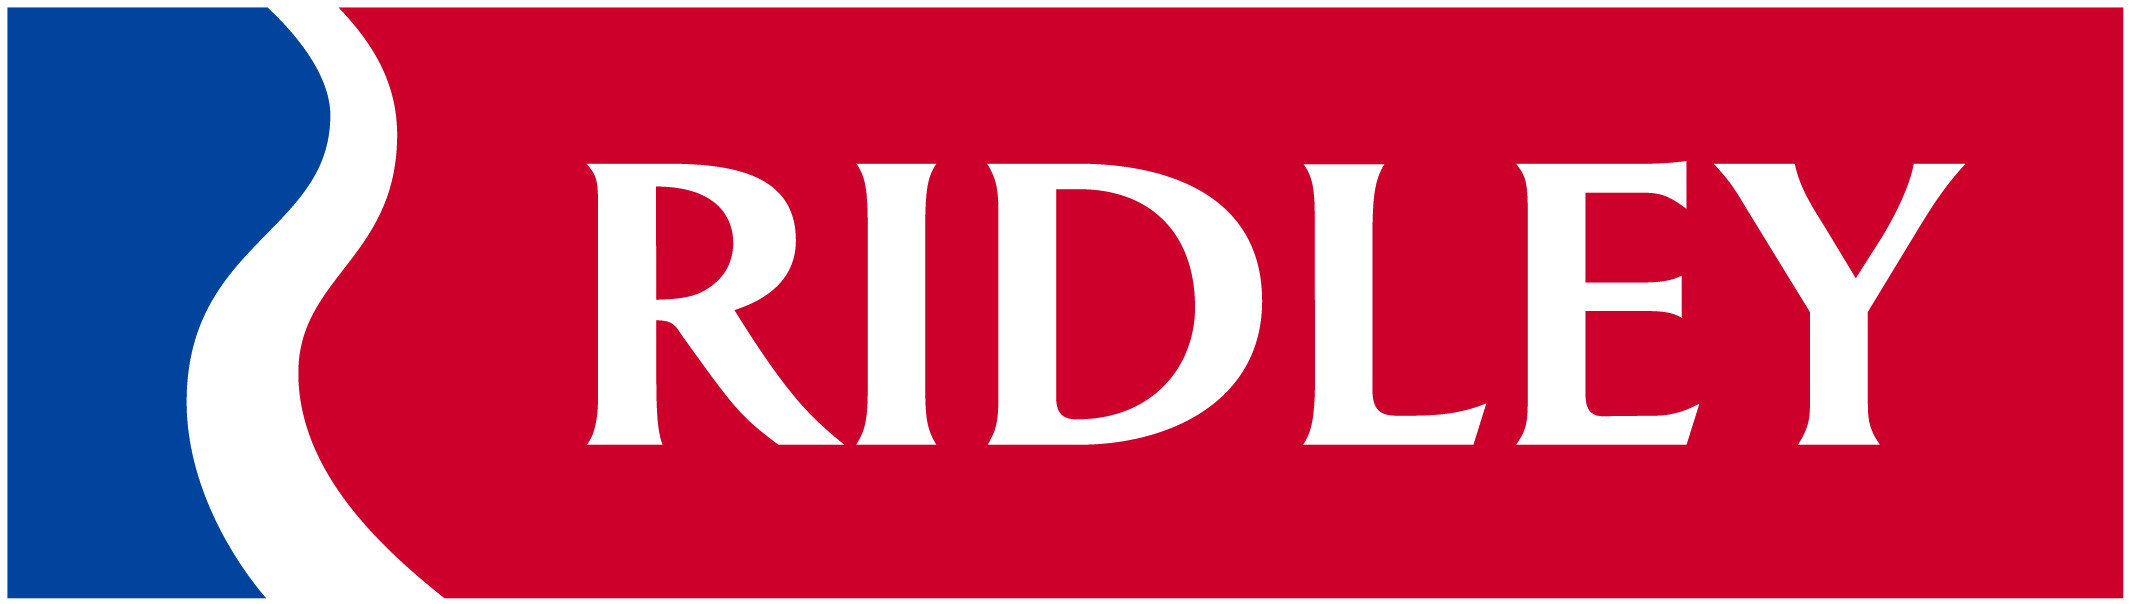 Ridley Corporation Limited Logo